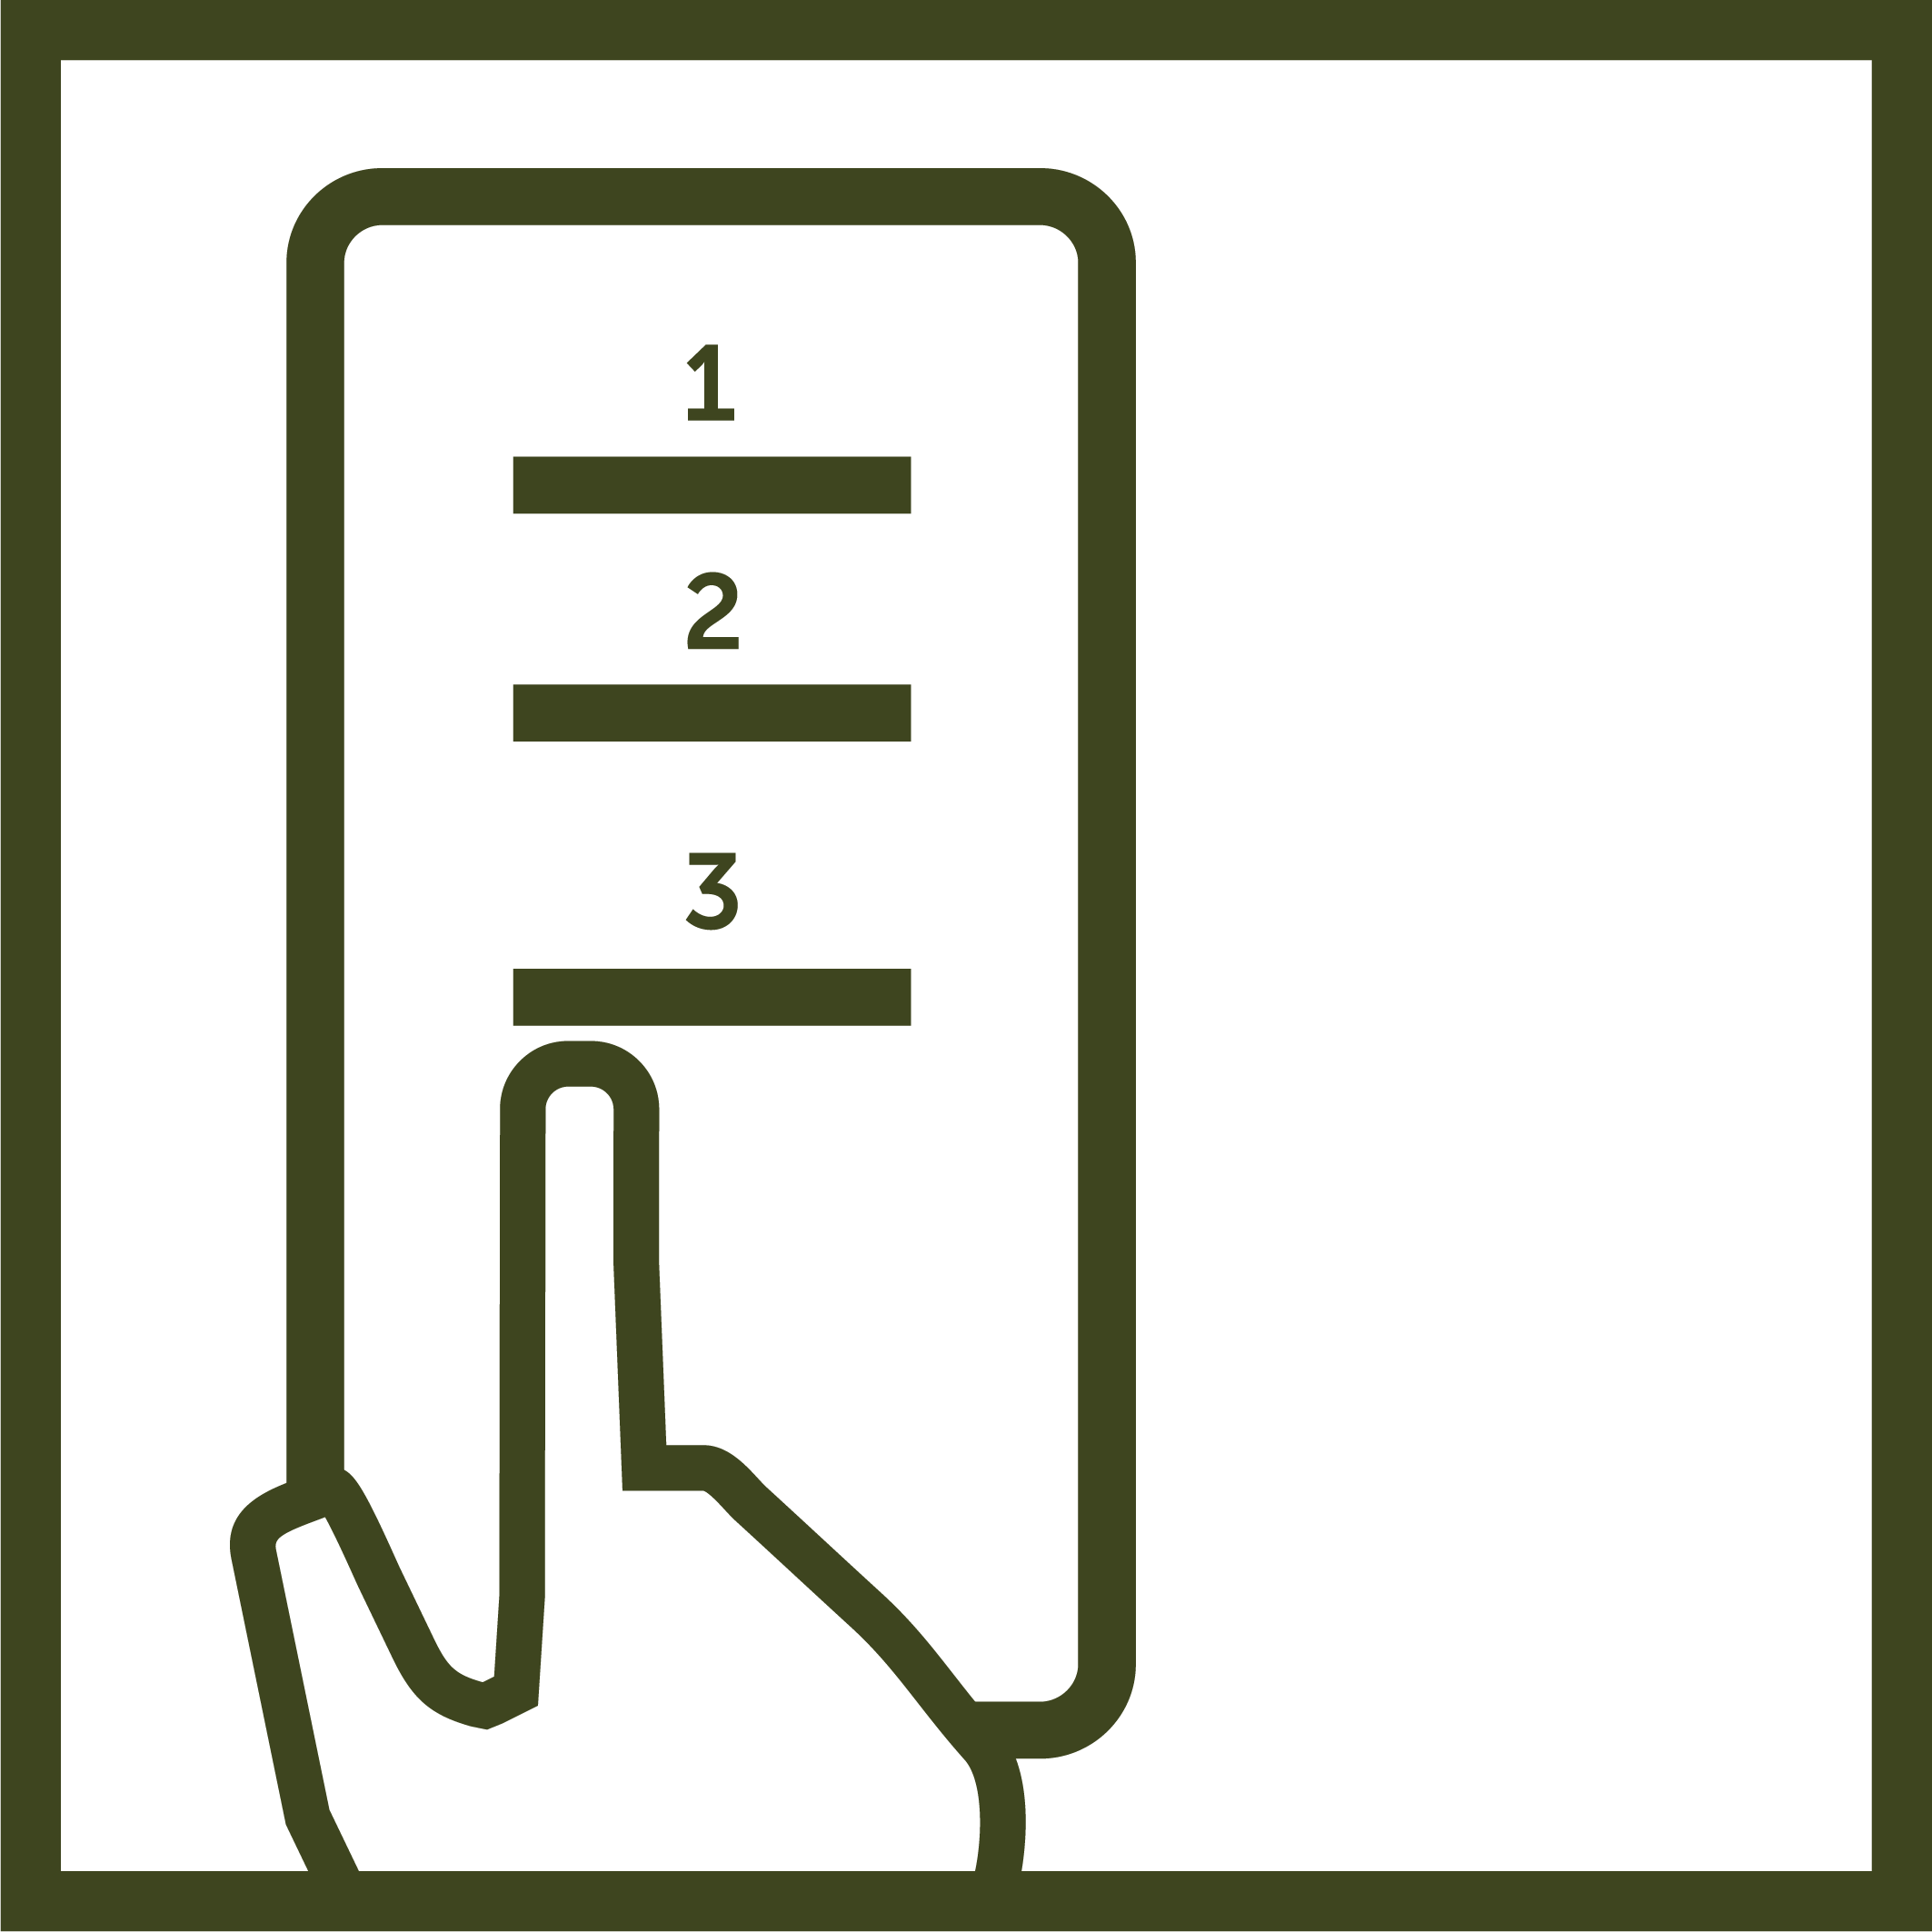 Pictogram of a mobile phone